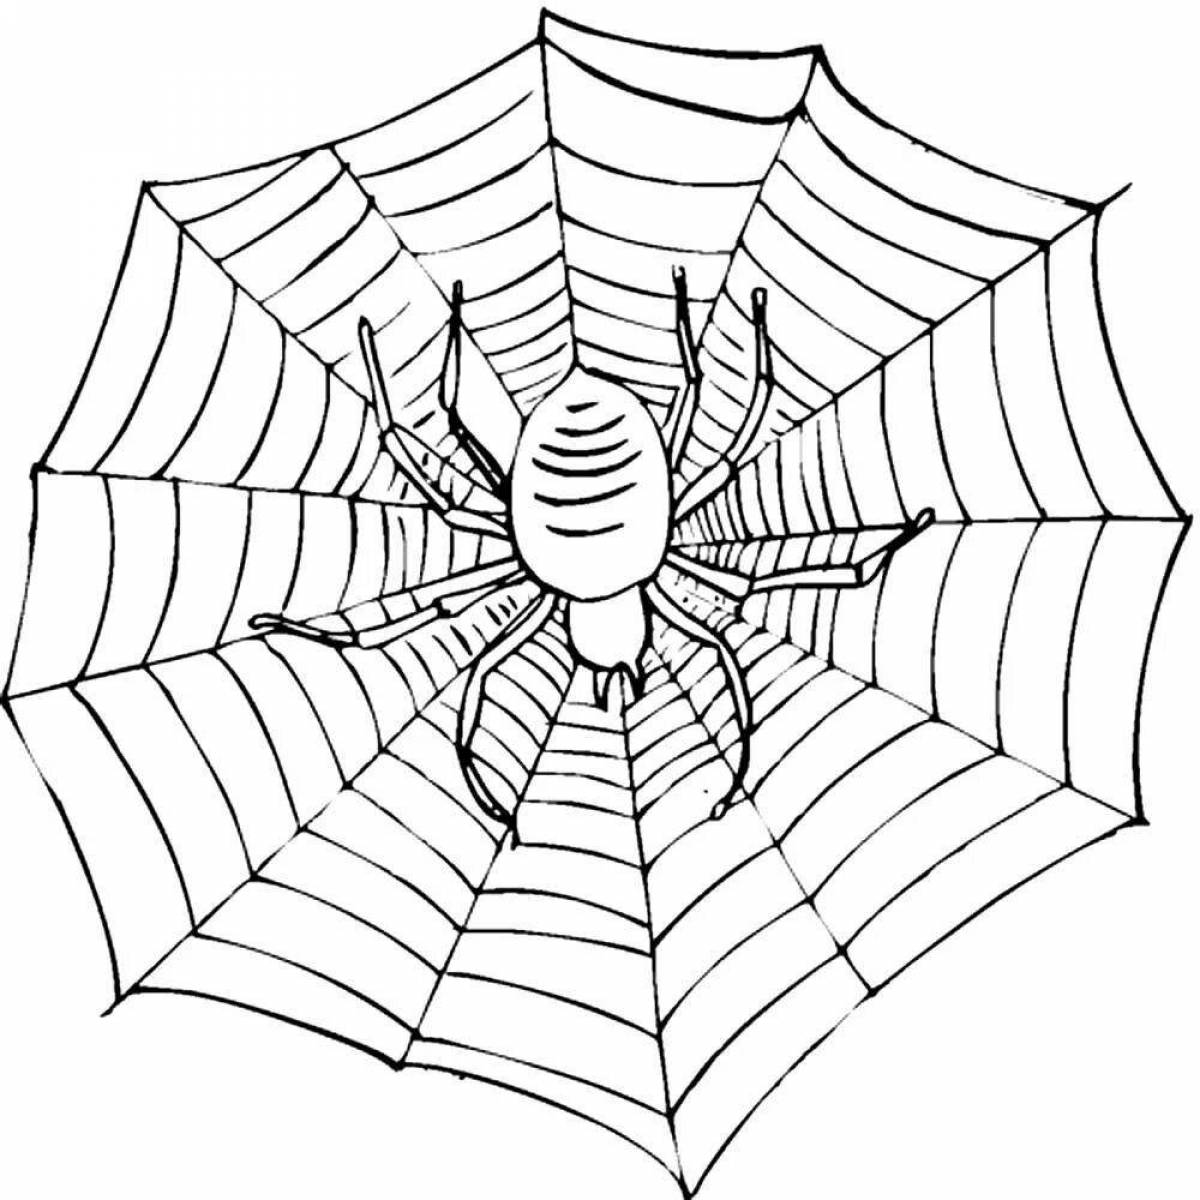 Amazing web coloring book for kids